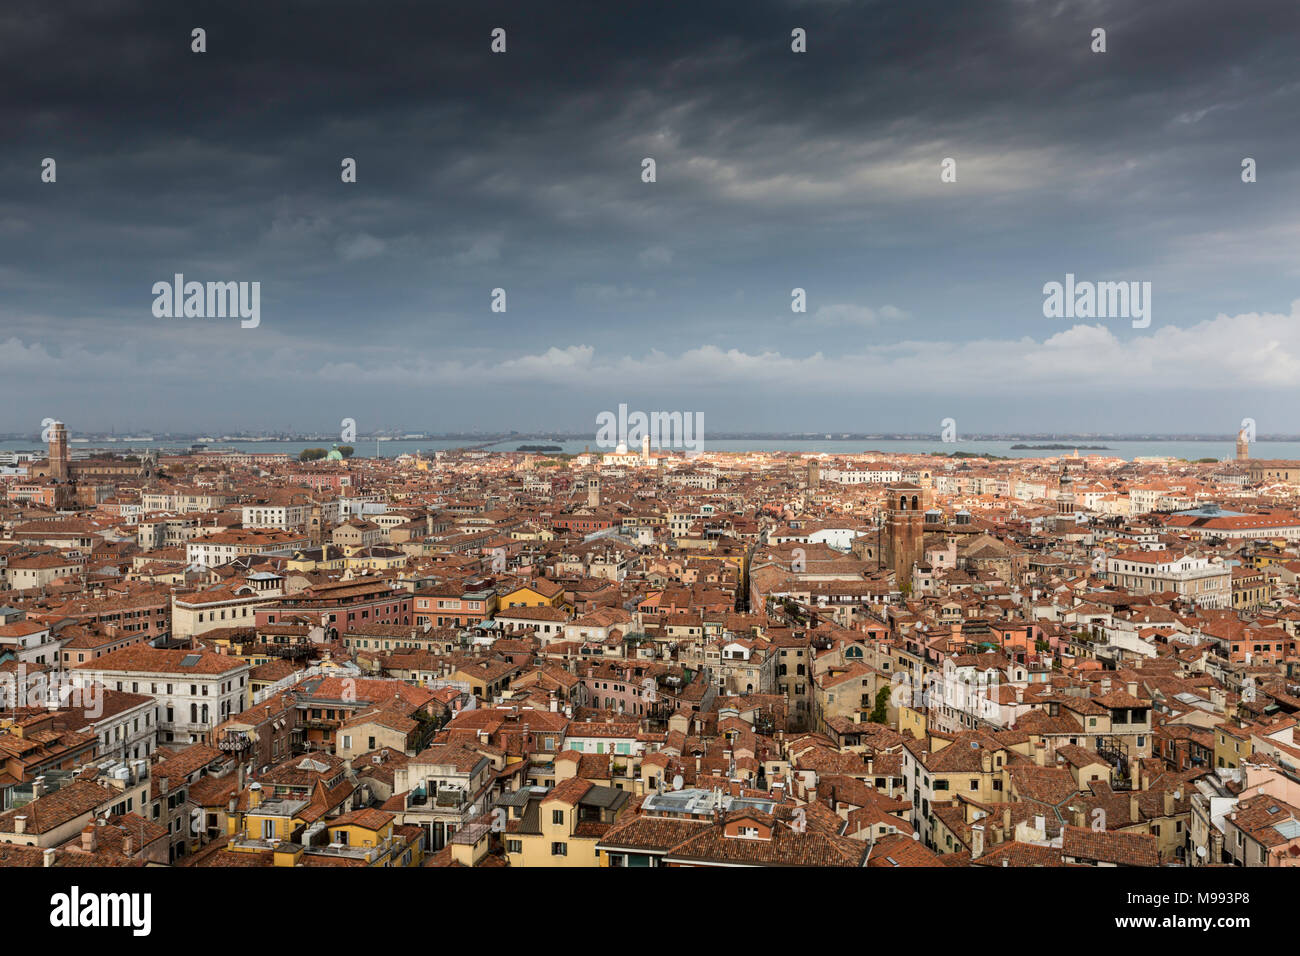 View across the red rooftops from the Campanile in St Mark's Square looking north showing the different styles of architecture - Venice, Italy. Stock Photo